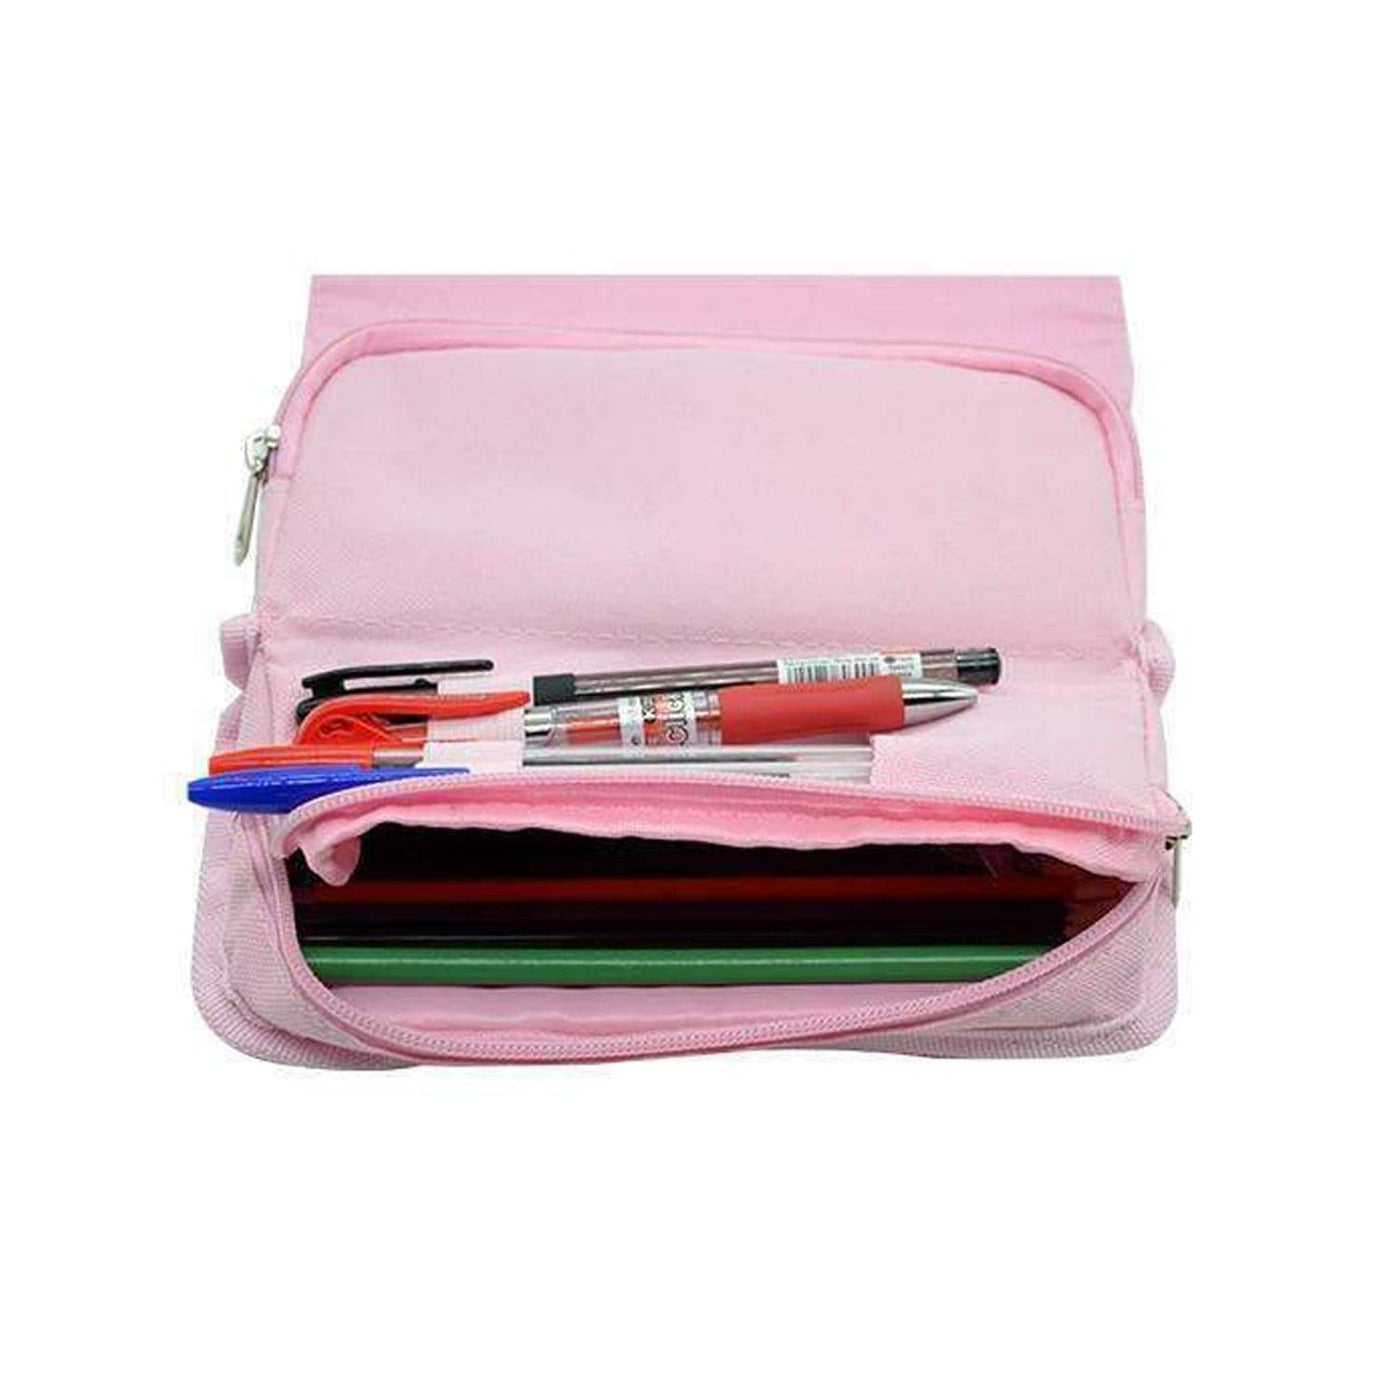 We Have To Dance It Out - Grey's Anatomy Pencil Case